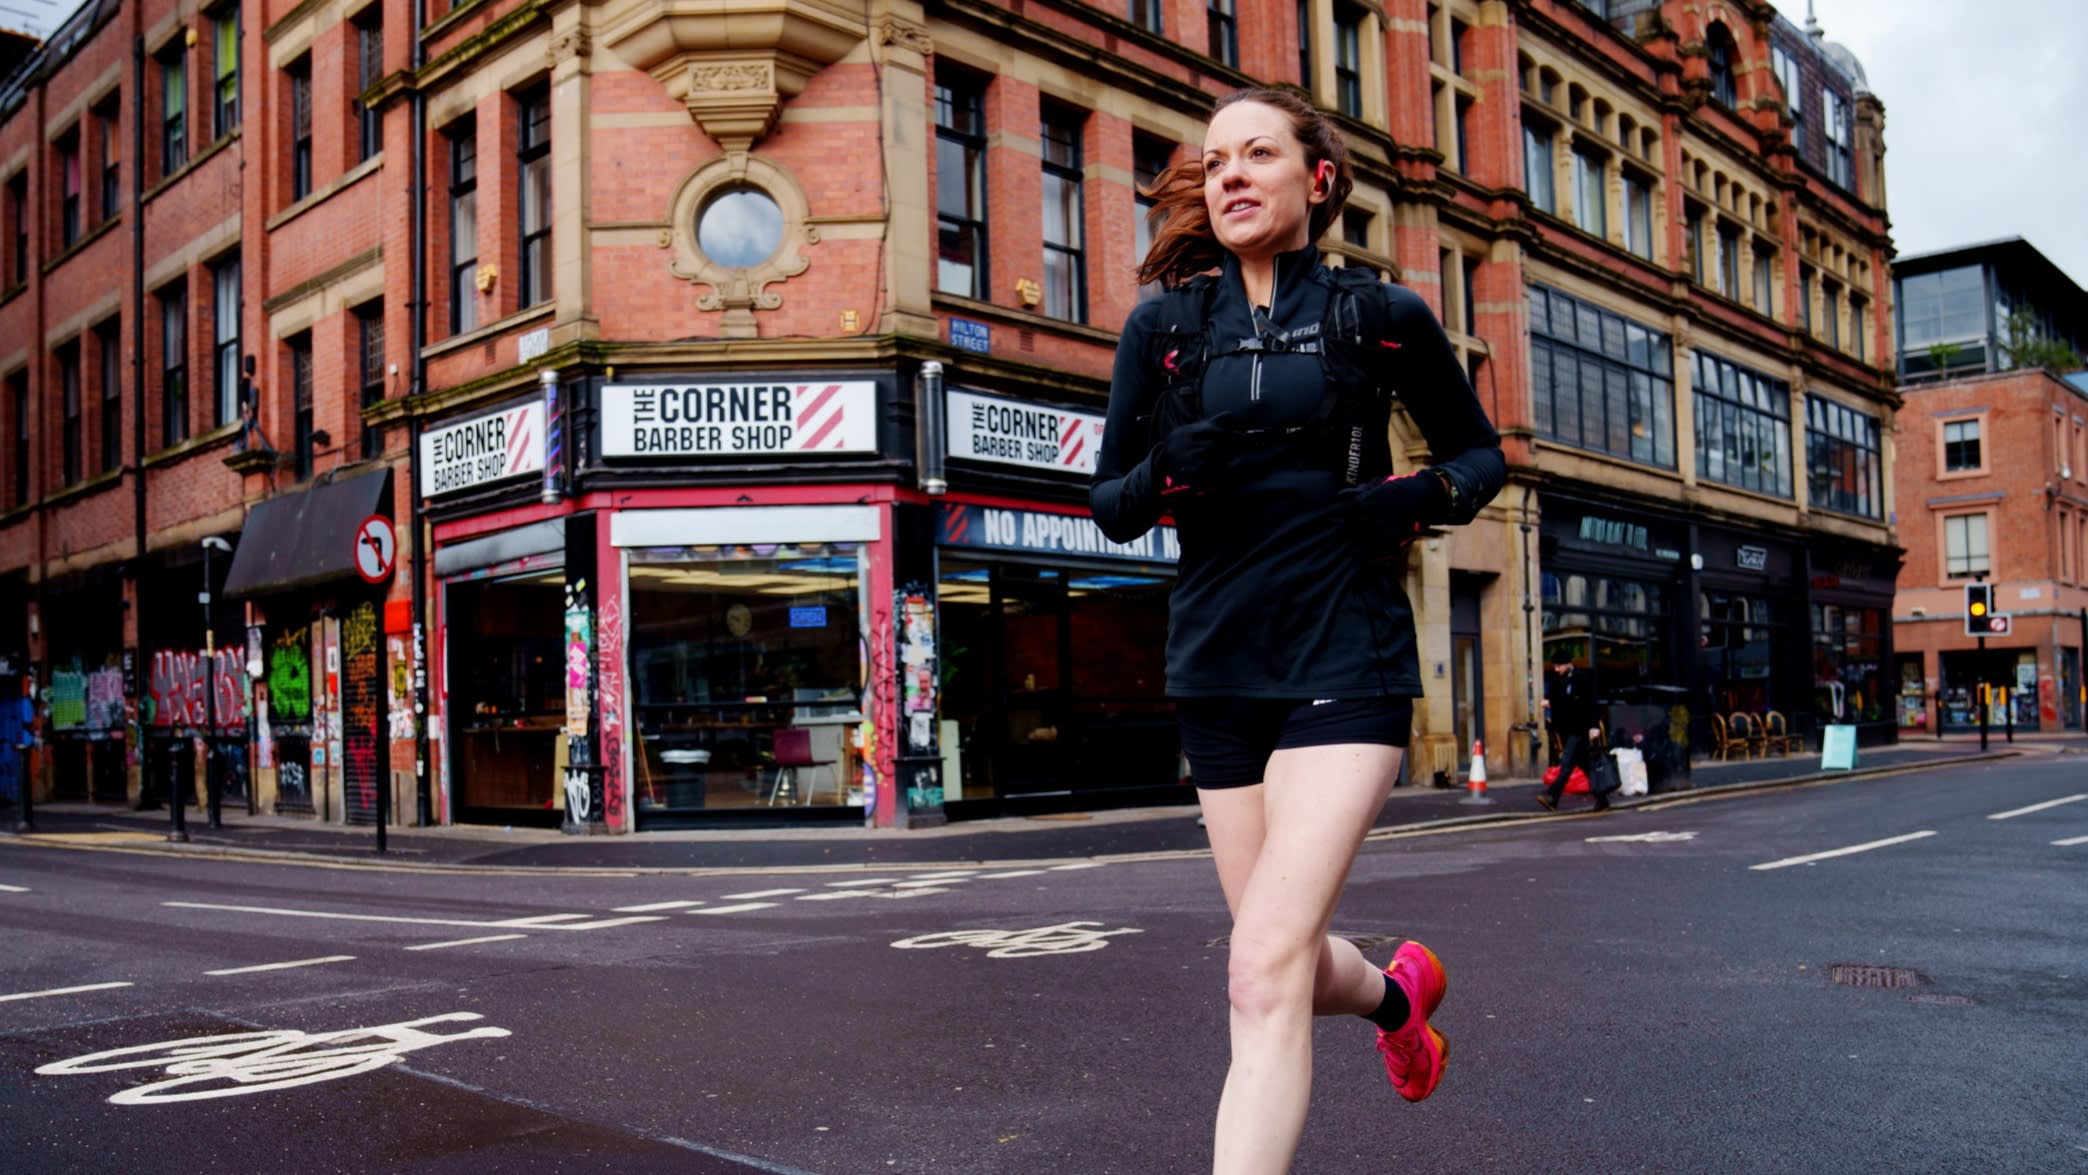 Clair Heaviside makes her way through Manchester’s Northern Quarter as she arrives at work after a running commute from her home in Disley 13 miles away